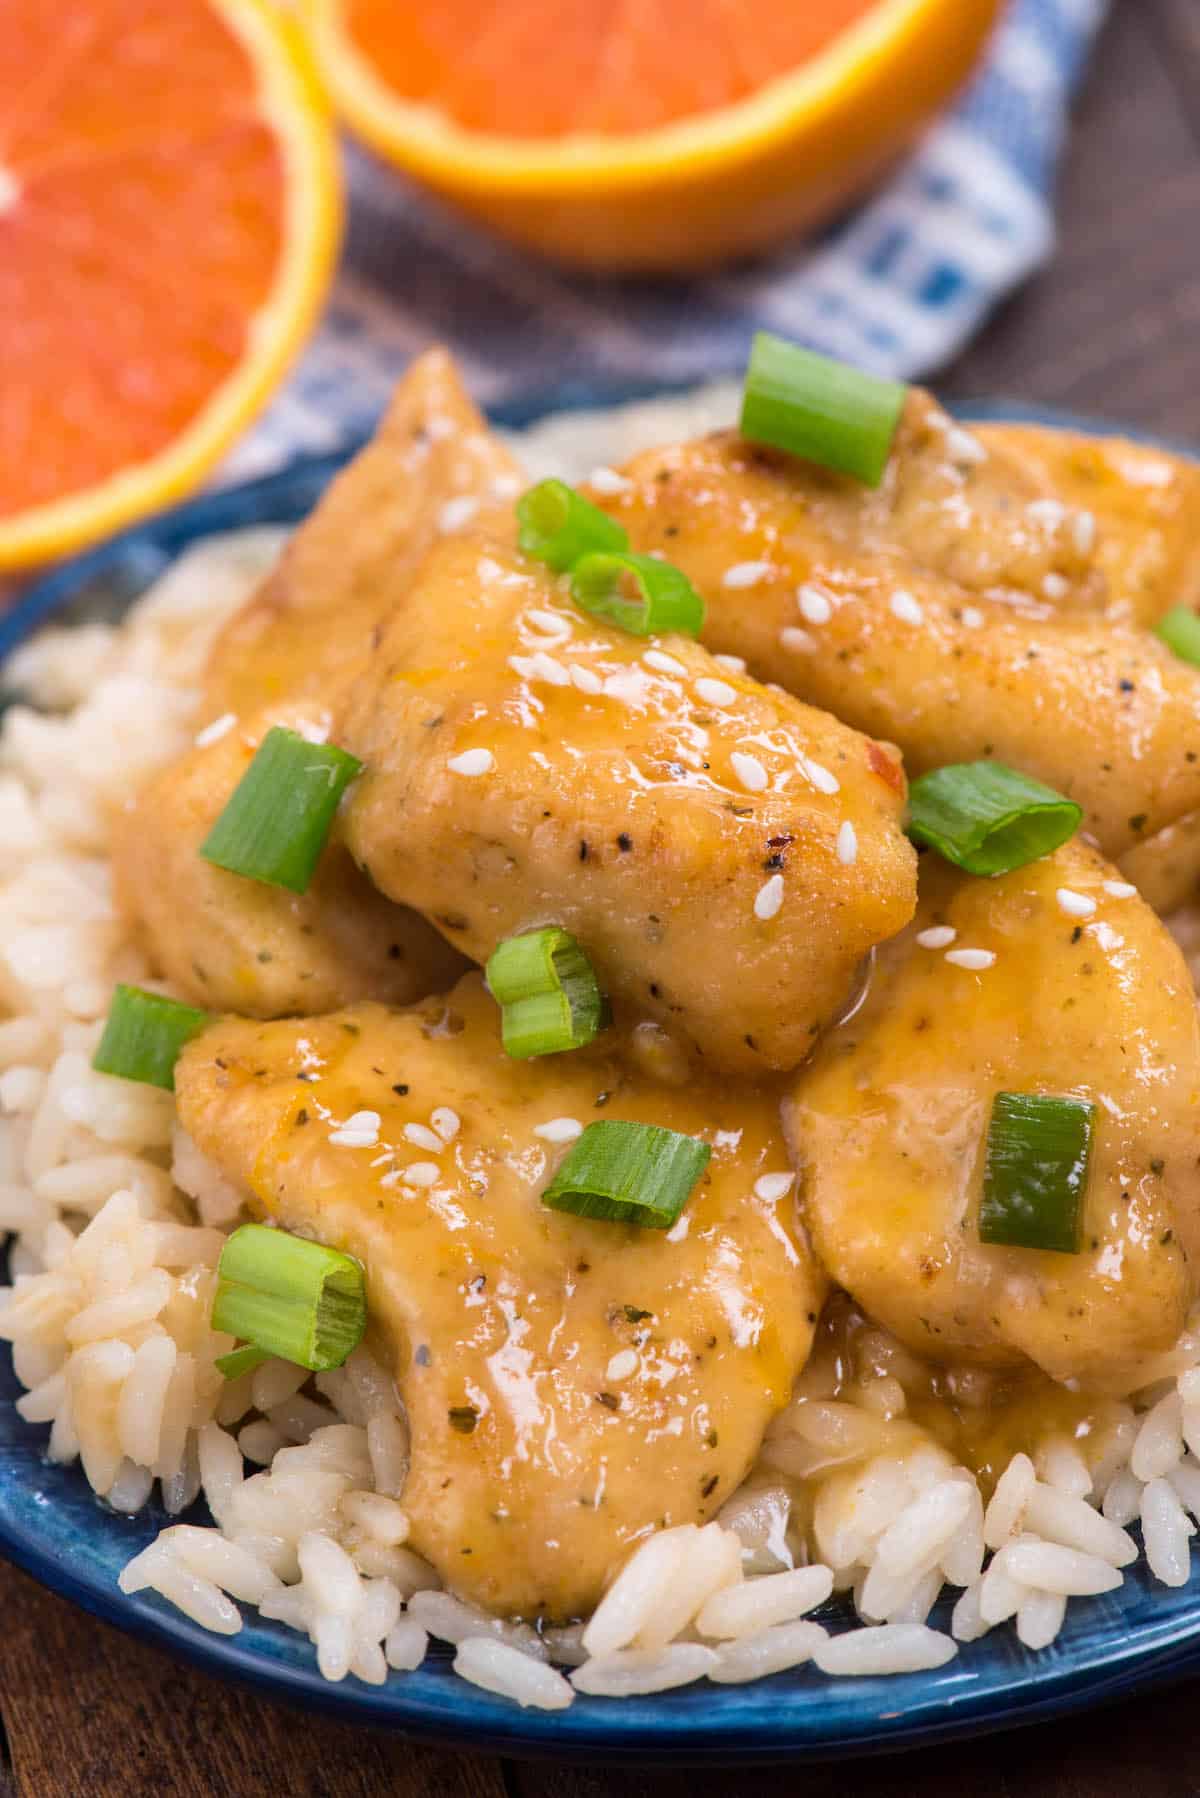 multiple pieces of orange chicken on a pile of rice on a blue plate.